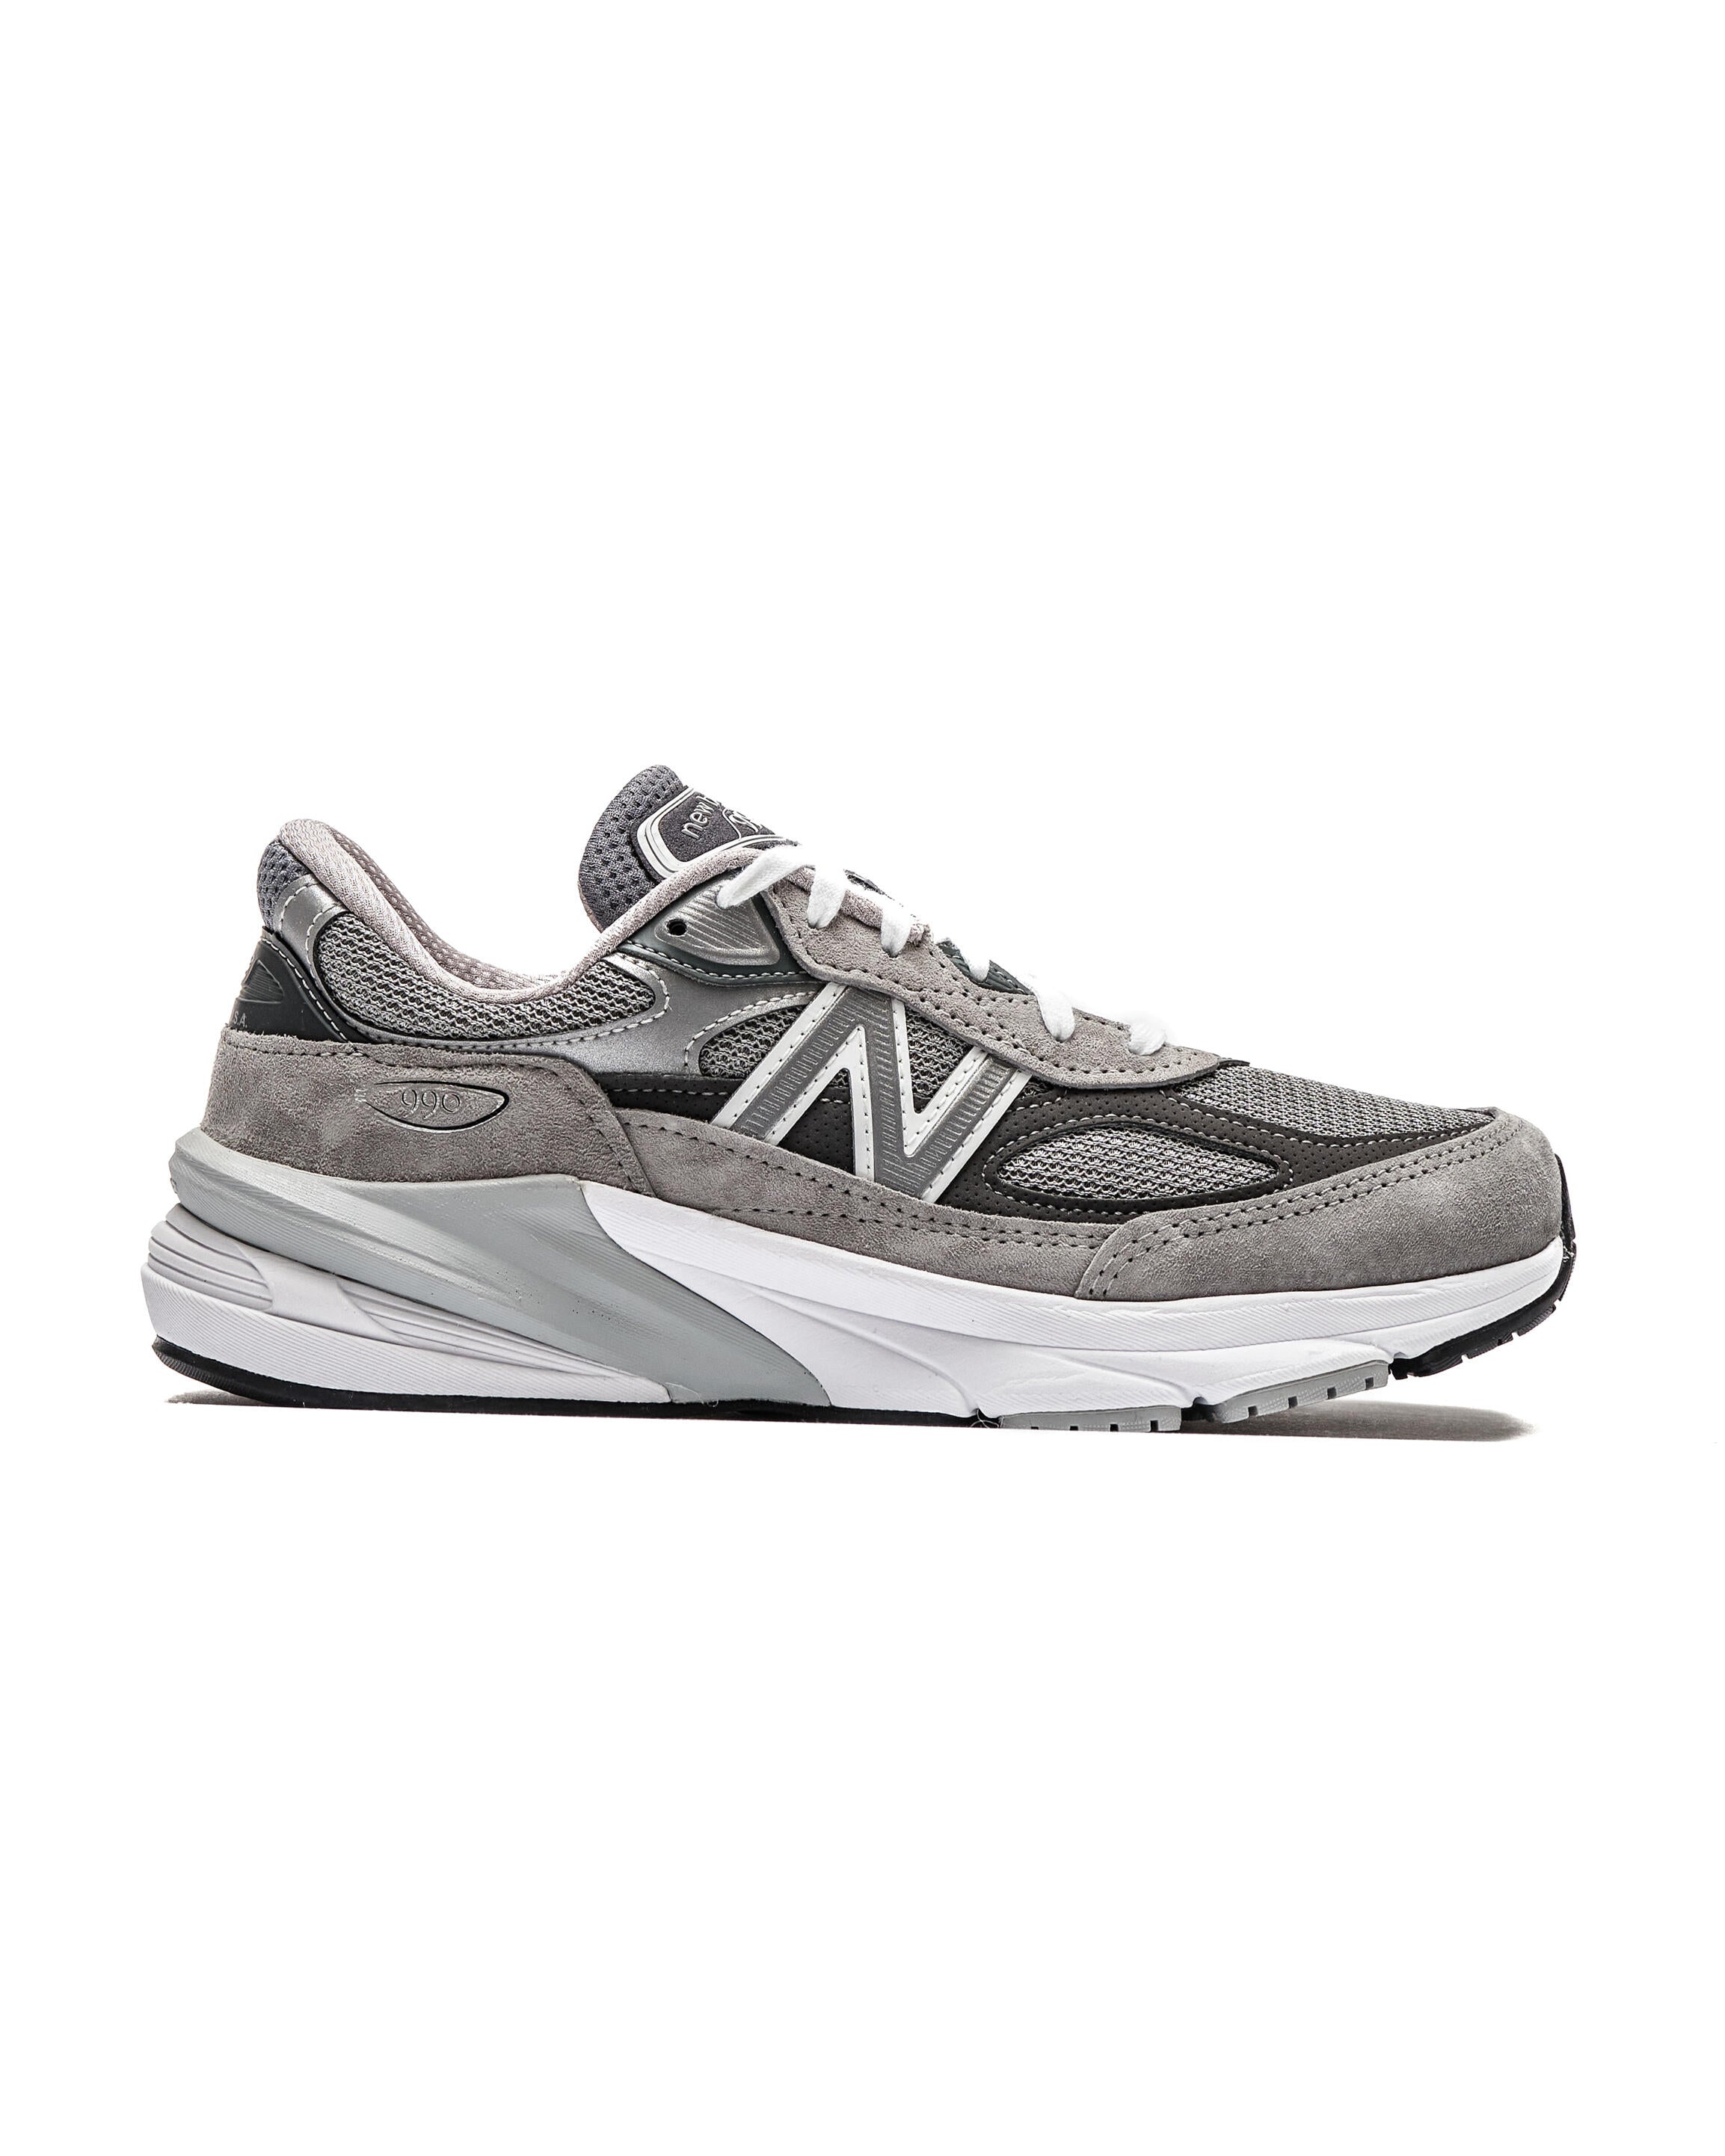 New Balance M 990 GL6 - Made in USA | M990GL6 | AFEW STORE